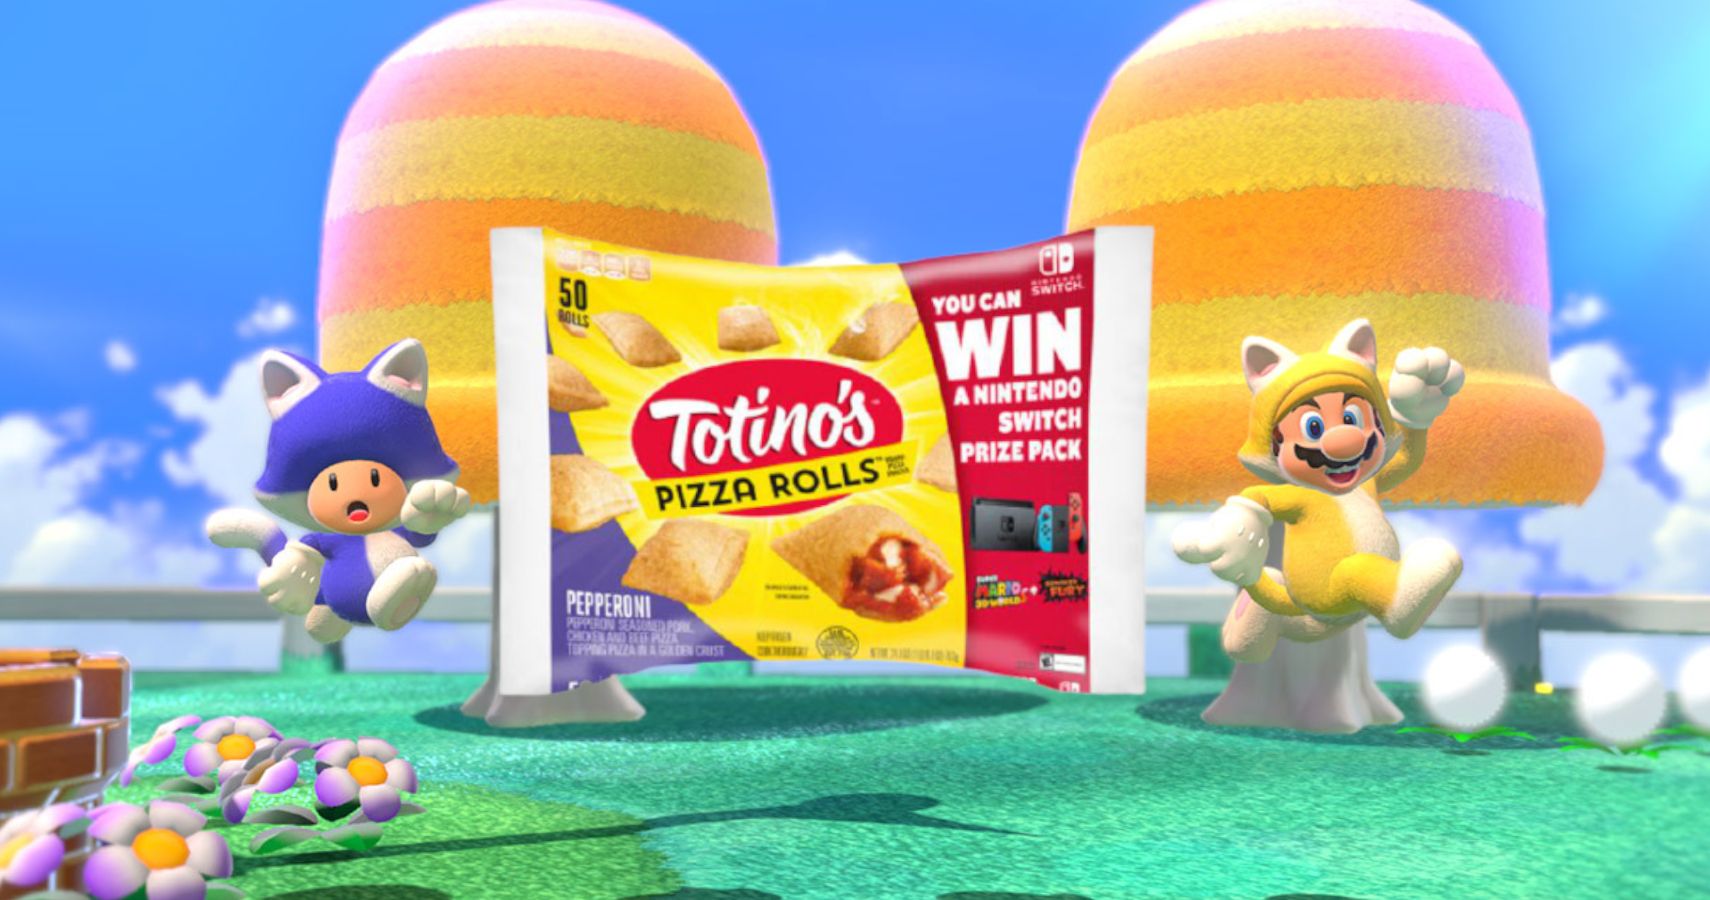 Nintendo Totino's Nintendo Switch Giveaway Contest Super Mario 3D World Bowser's Fury